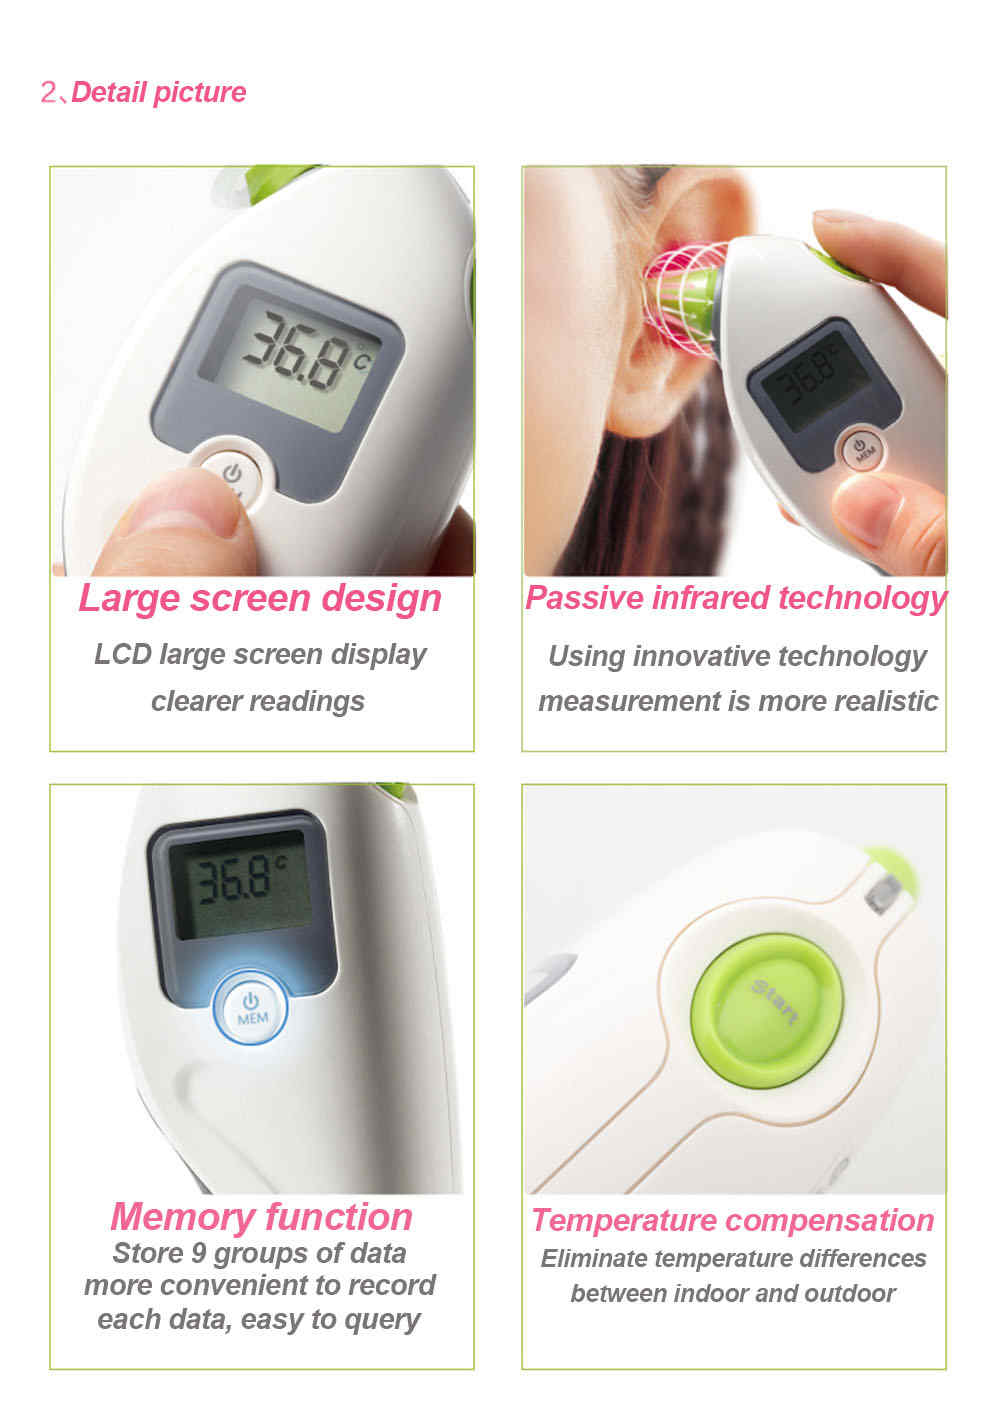 Yuwell-YHT102-Ear-Thermometer-Digital-Infrared-Temperature-Measurement-Fever-Alarm-Family-Essential--1446547